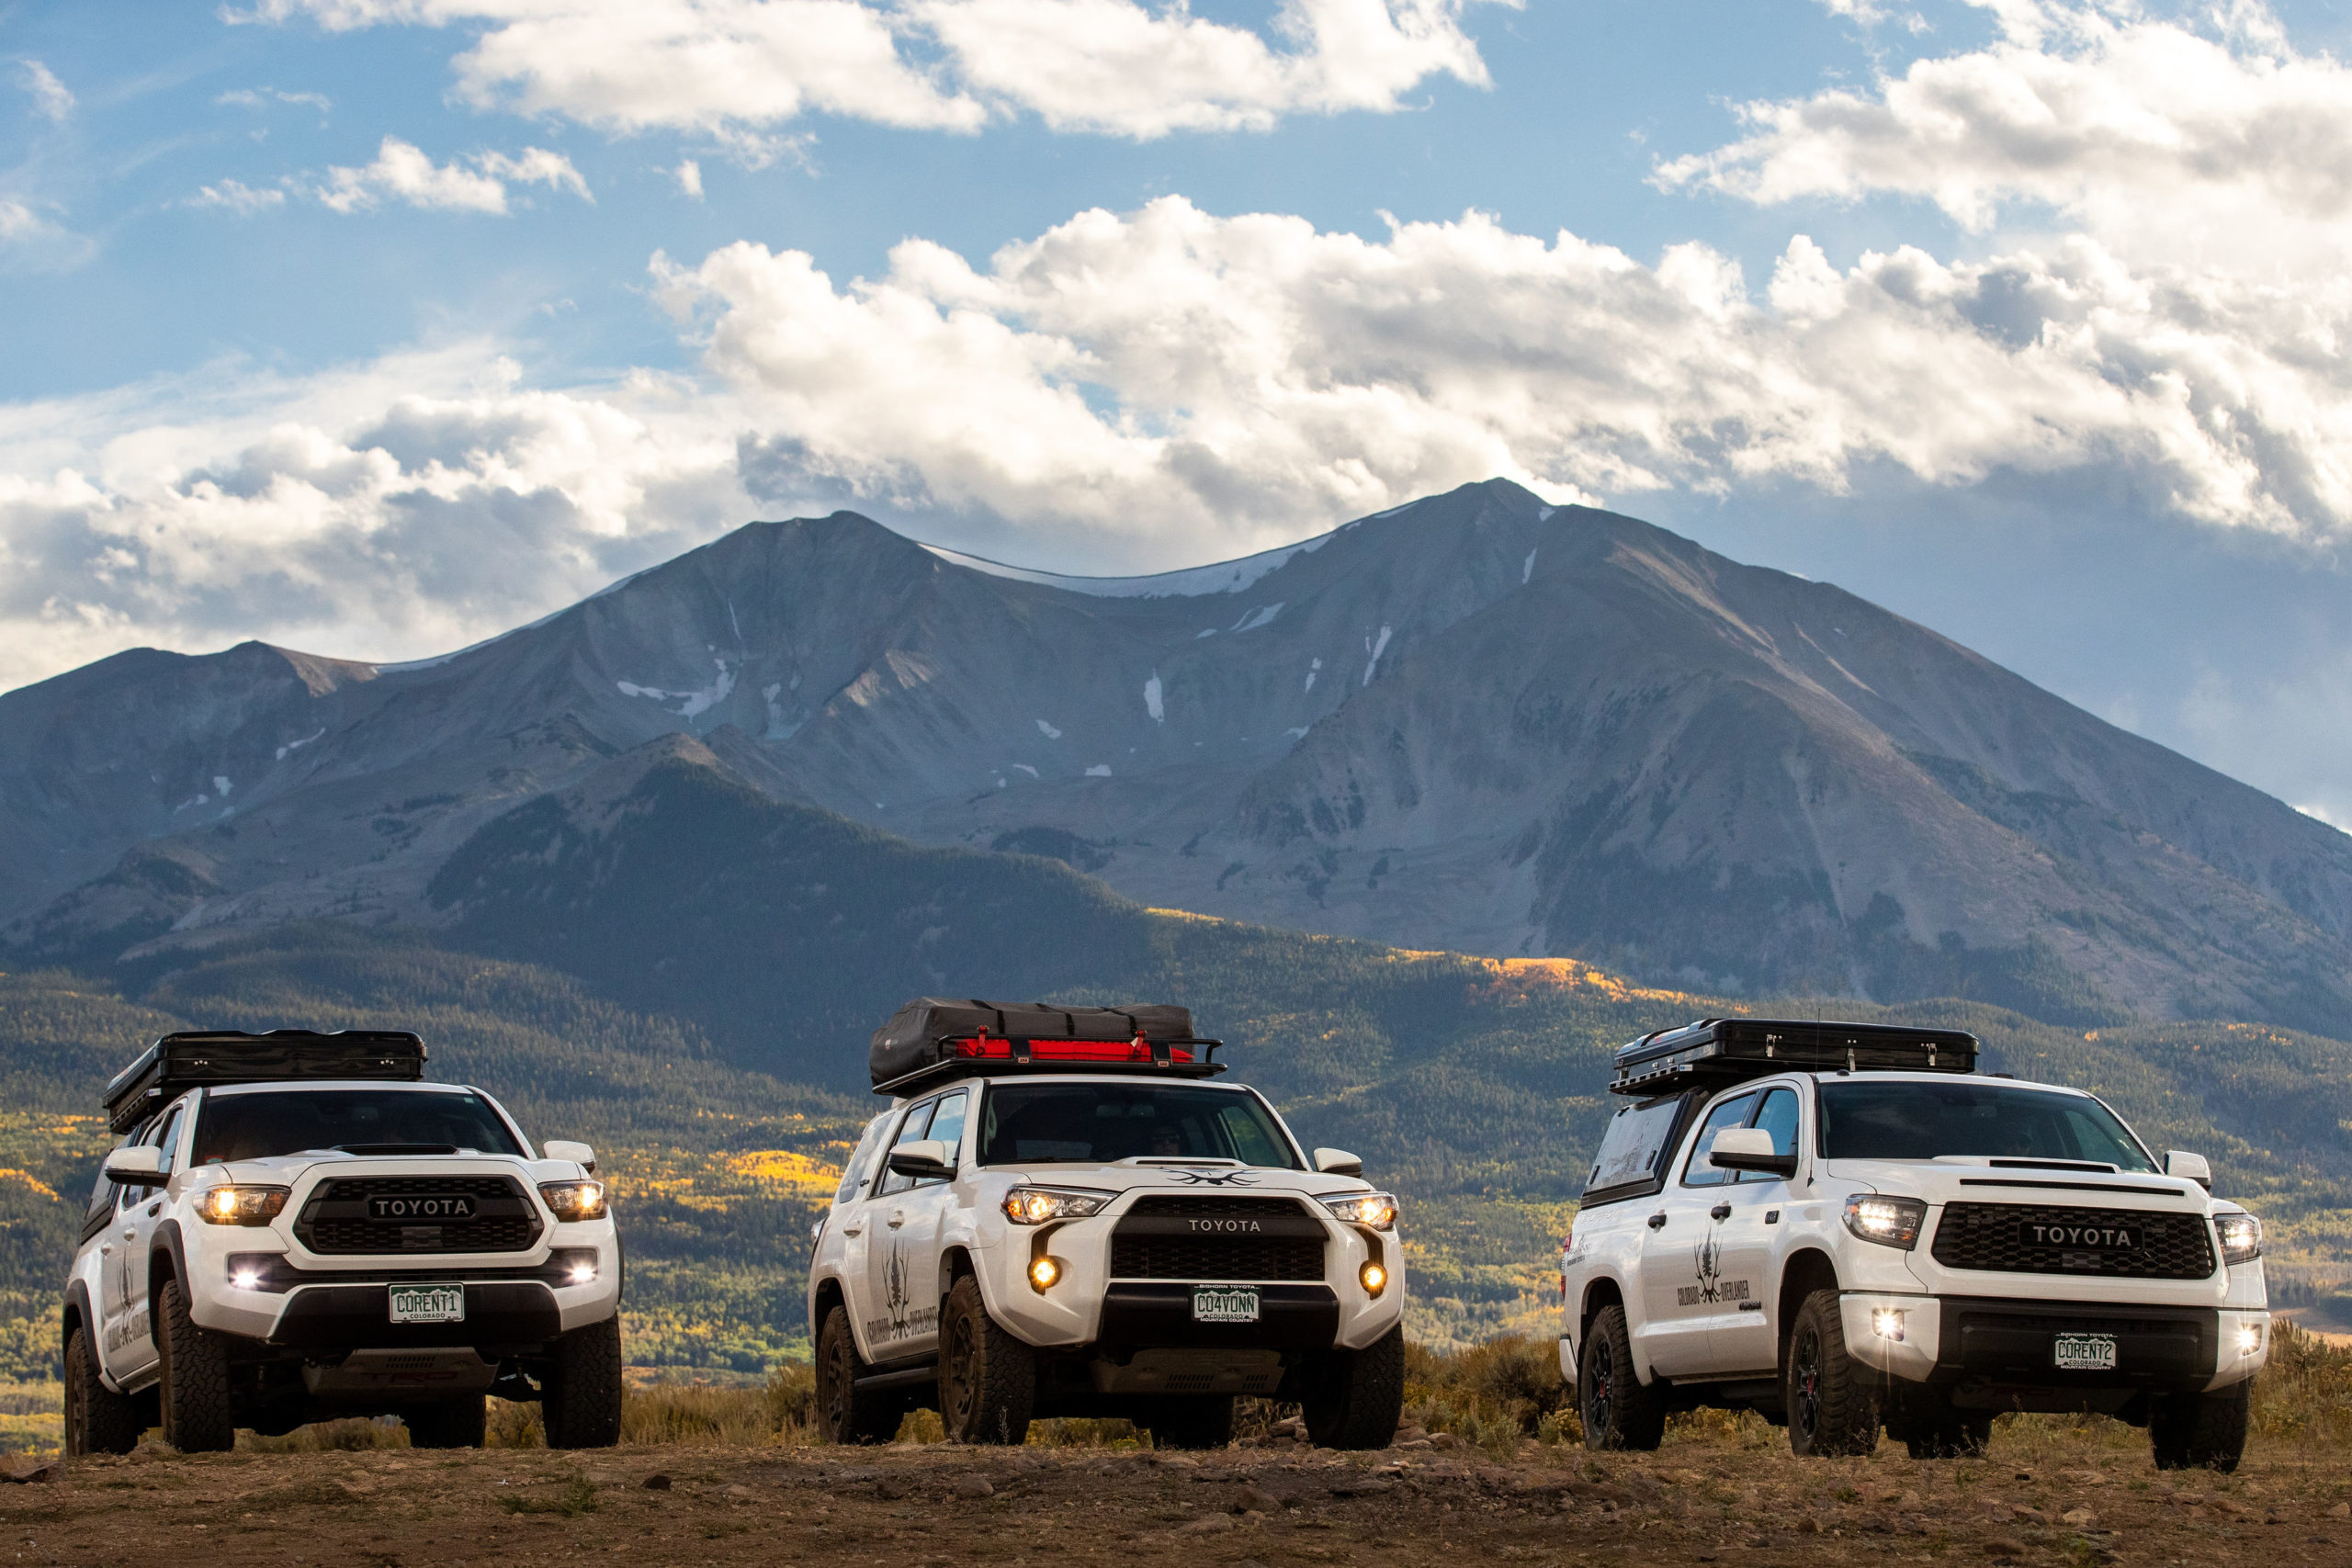 Image of three Colorado Overlander vehicles- a Toyota Tacoma, 4Runner, and Tundra in front of Mt. Sopris in the Roaring Fork Valley